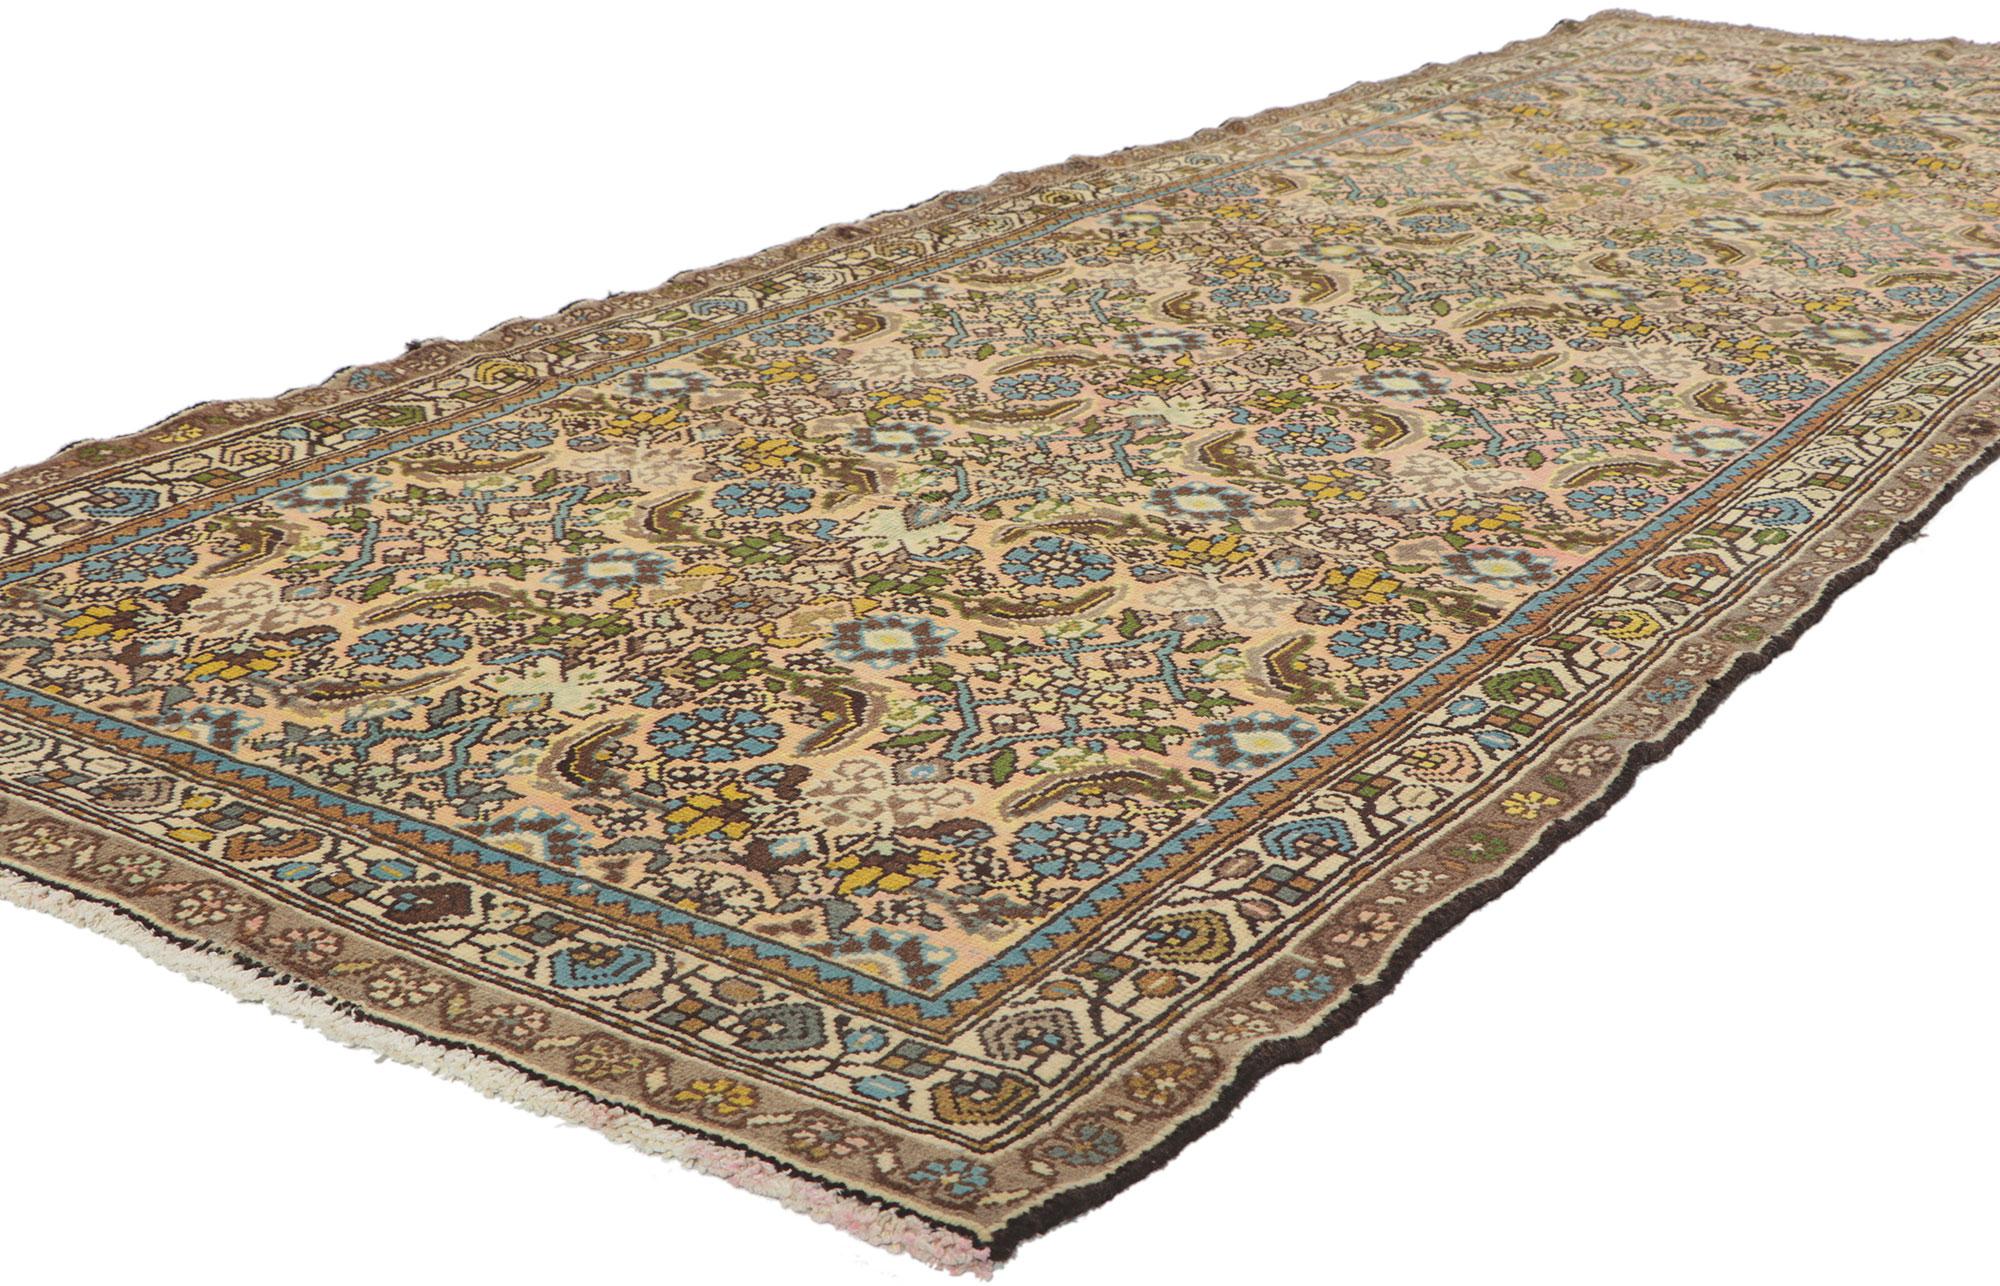 61163 Vintage Persian Malayer runner, 03'06 x 09'09.
With its timeless style, incredible detail and texture, this hand knotted wool vintage Persian Malayer runner is a captivating vision of woven beauty. The eye-catching Herati design and dreamy